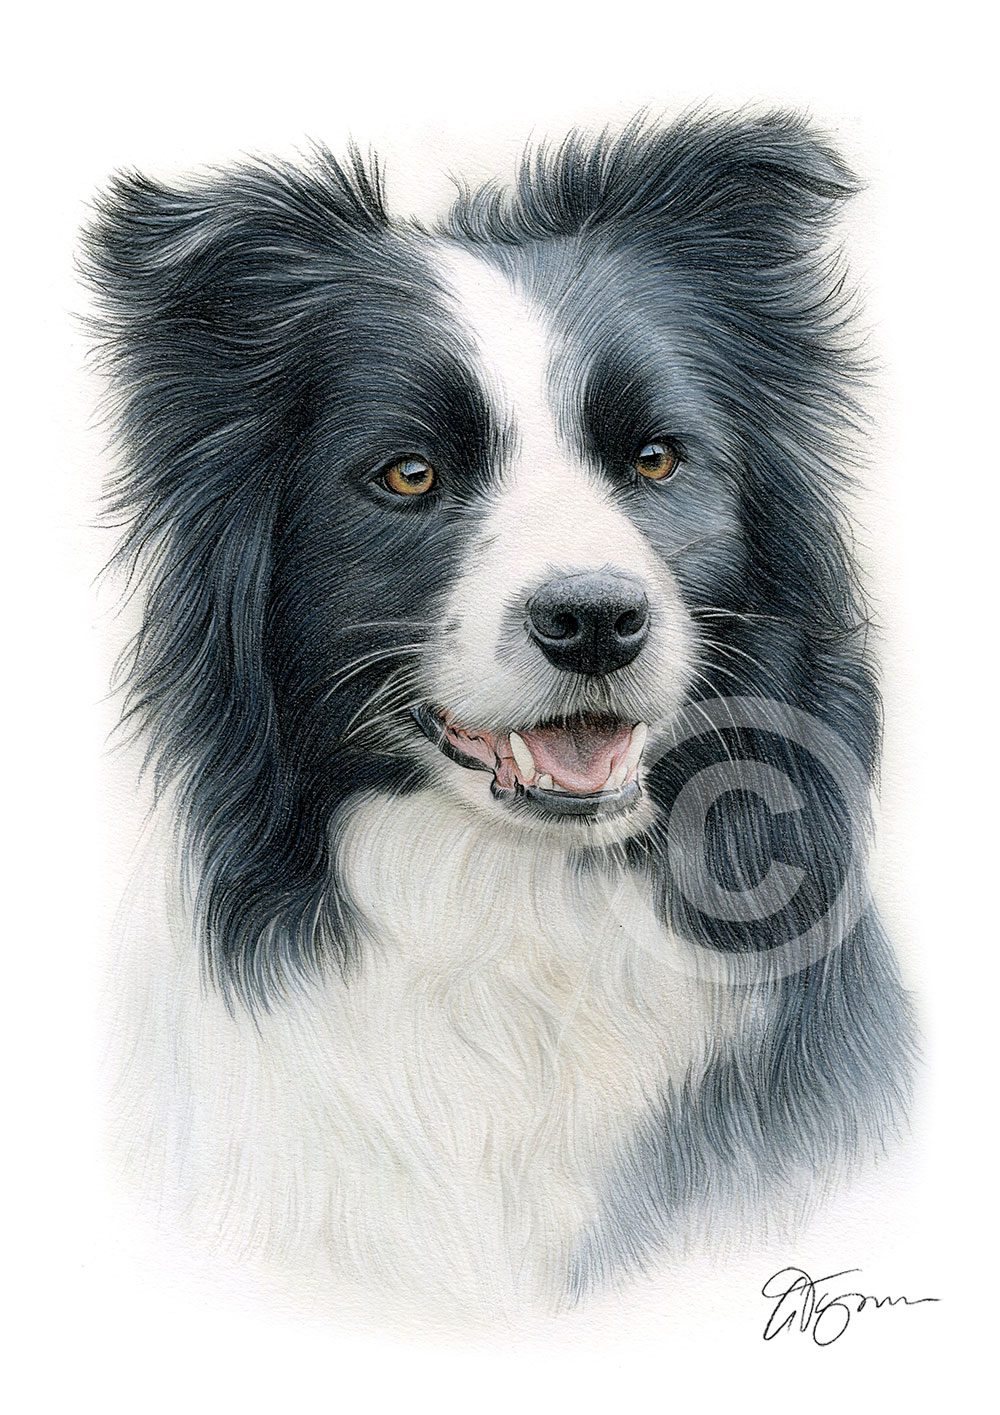 Colour pencil drawing of a Border Collie by artist Gary Tymon